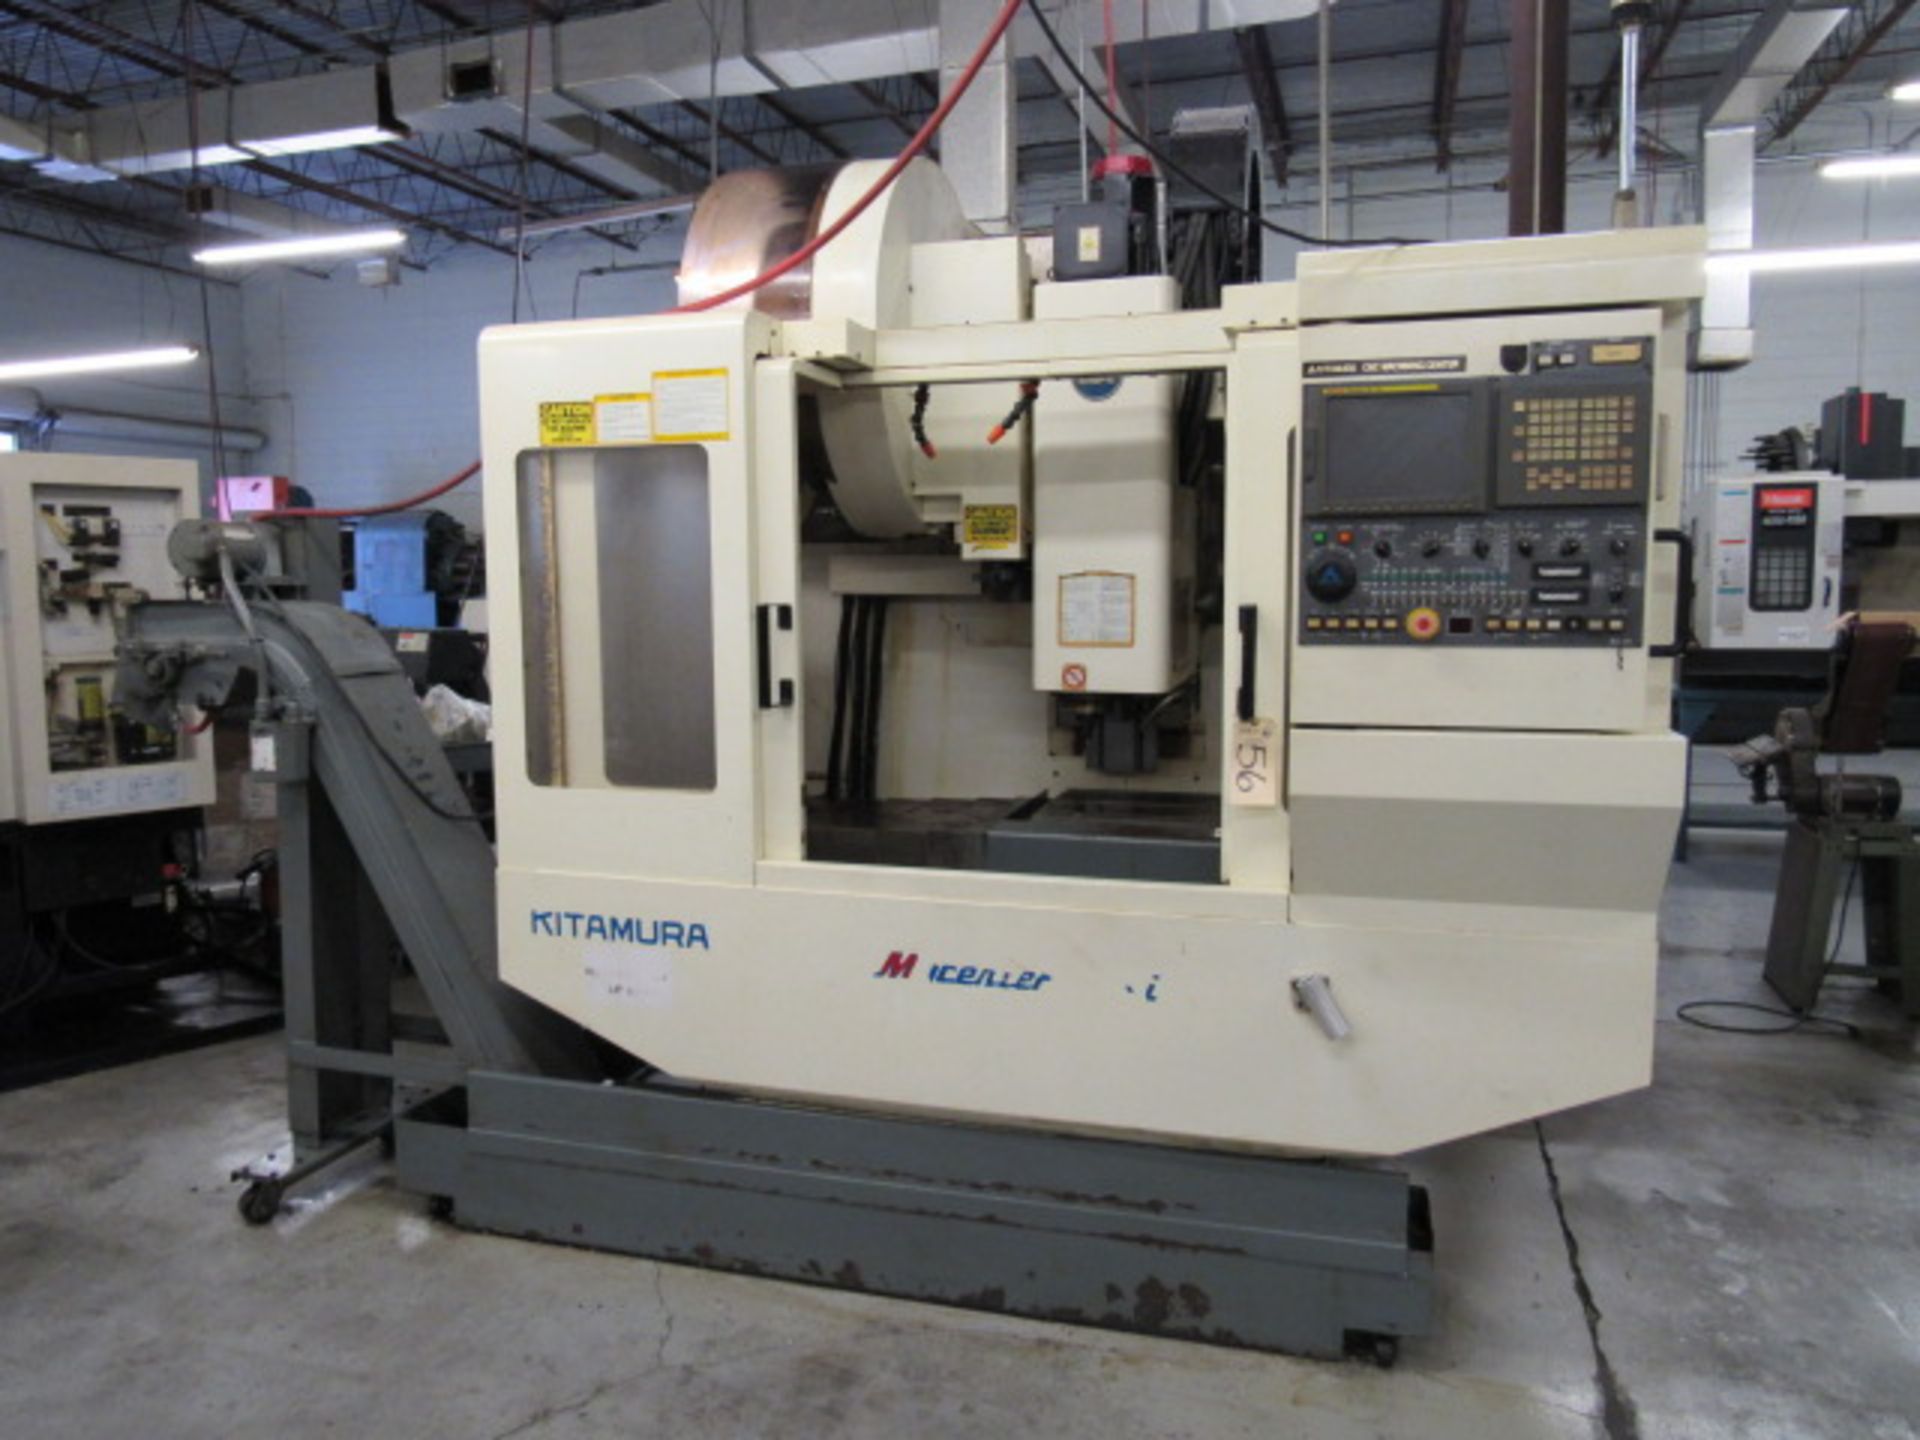 Kitamura MyCenter 3X/3Xi Wired for 4th Axis CNC Vertical Machining Center - Image 3 of 8